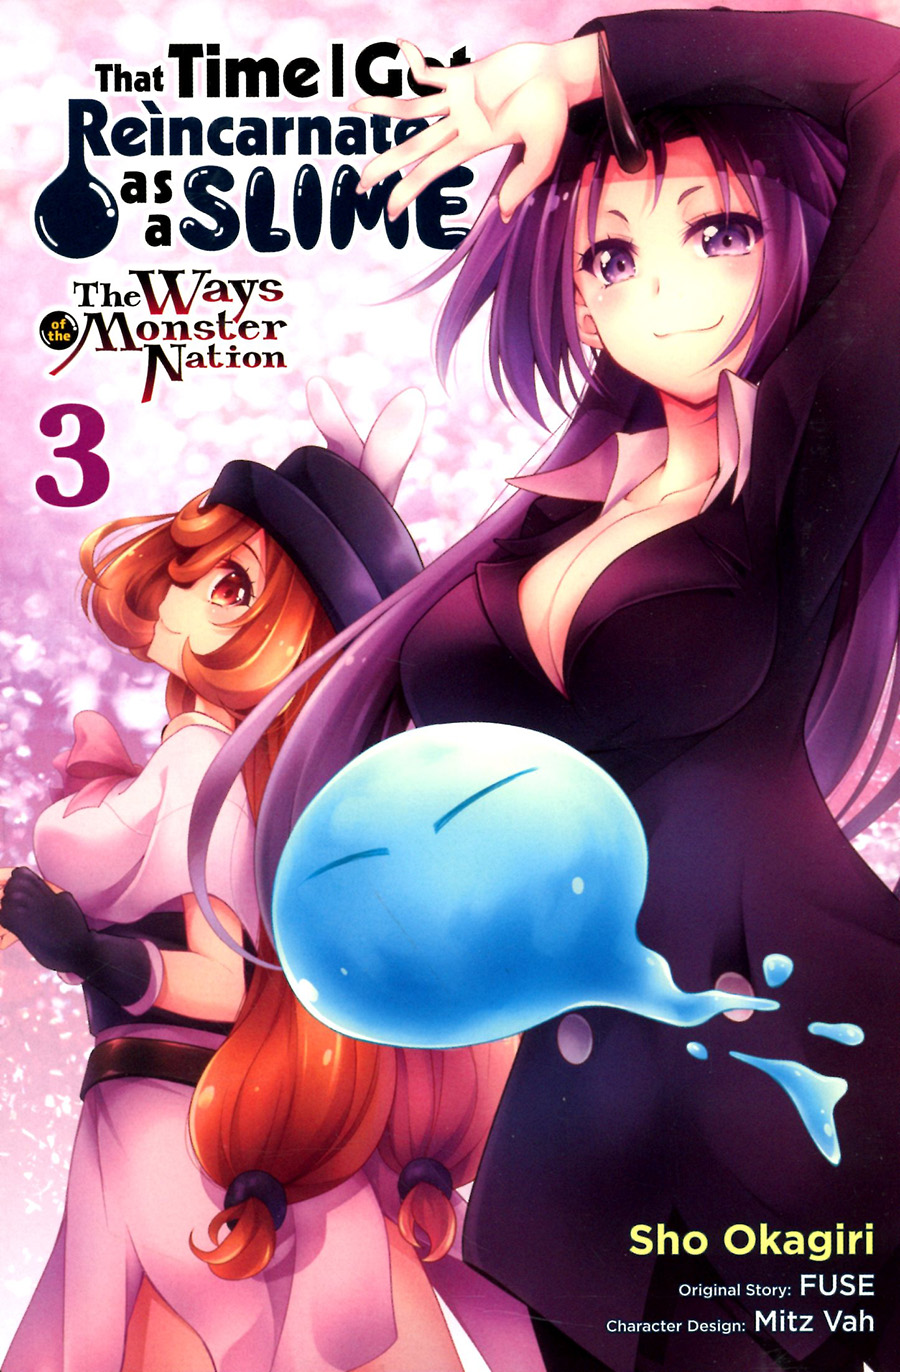 That Time I Got Reincarnated As A Slime Ways Of The Monster Nation Vol 3 GN